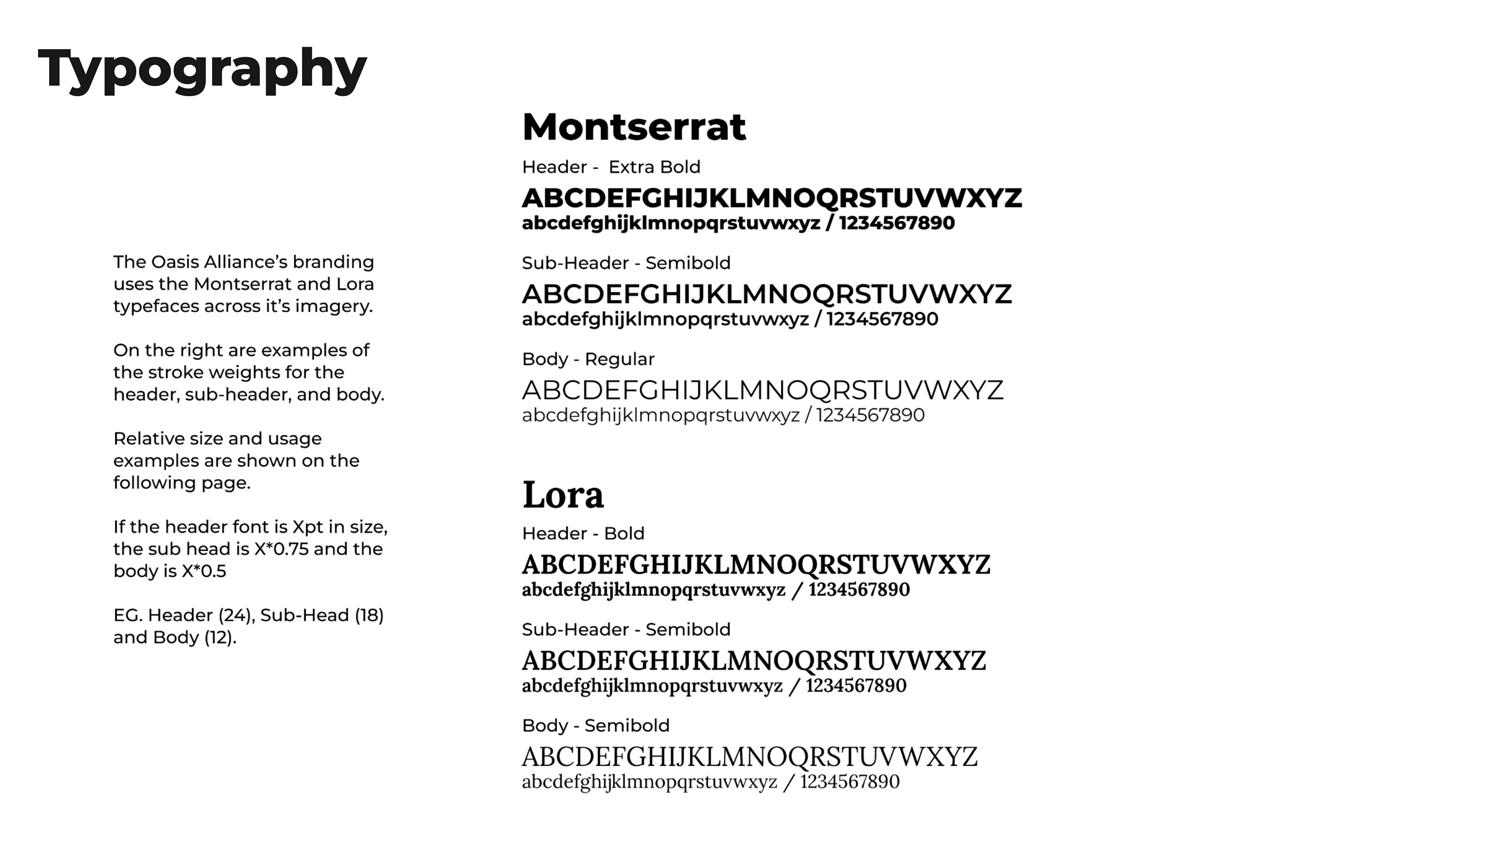 Branding typography guidelines featuring Monsterrat sans-serif and Lora serif fonts.